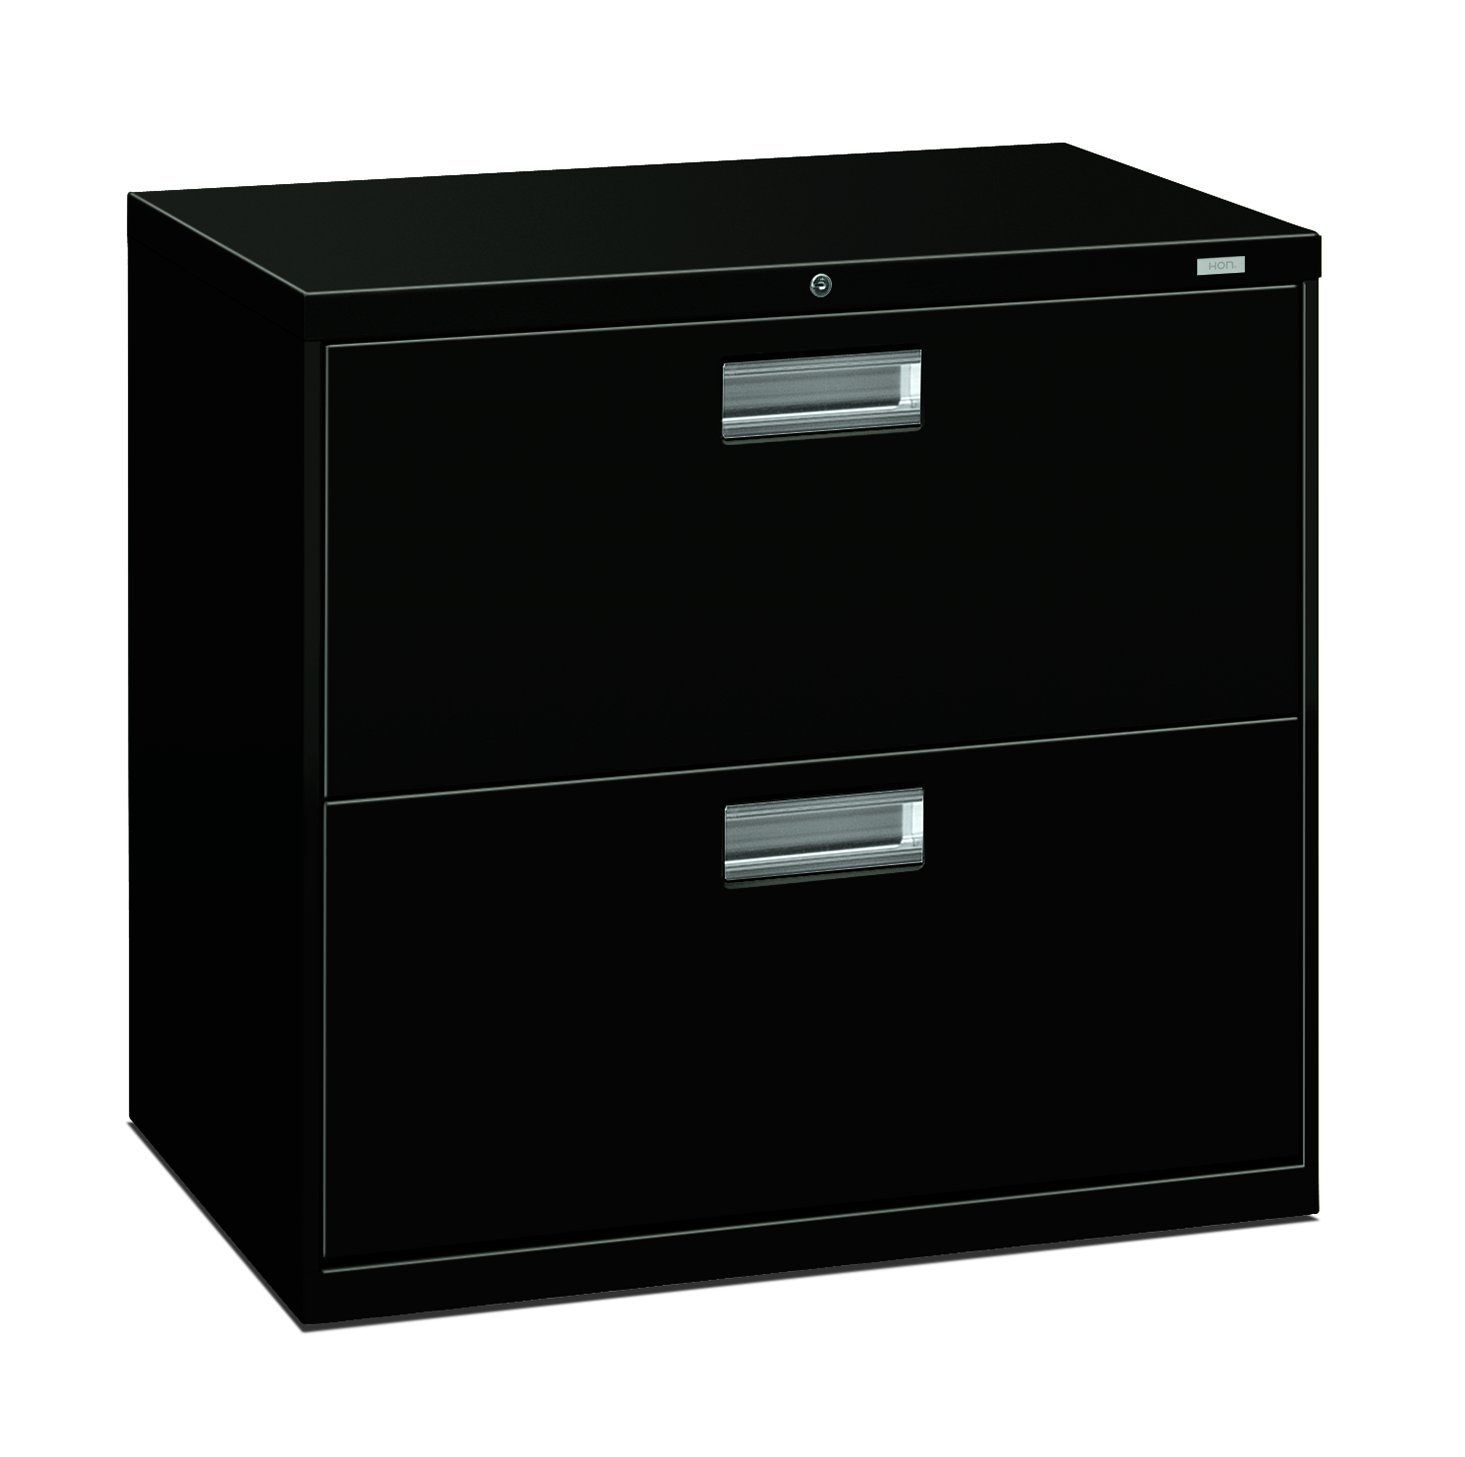 Outstanding Black File Cabinet 2 Drawer Metal Dividers Home Lockable inside proportions 1465 X 1457